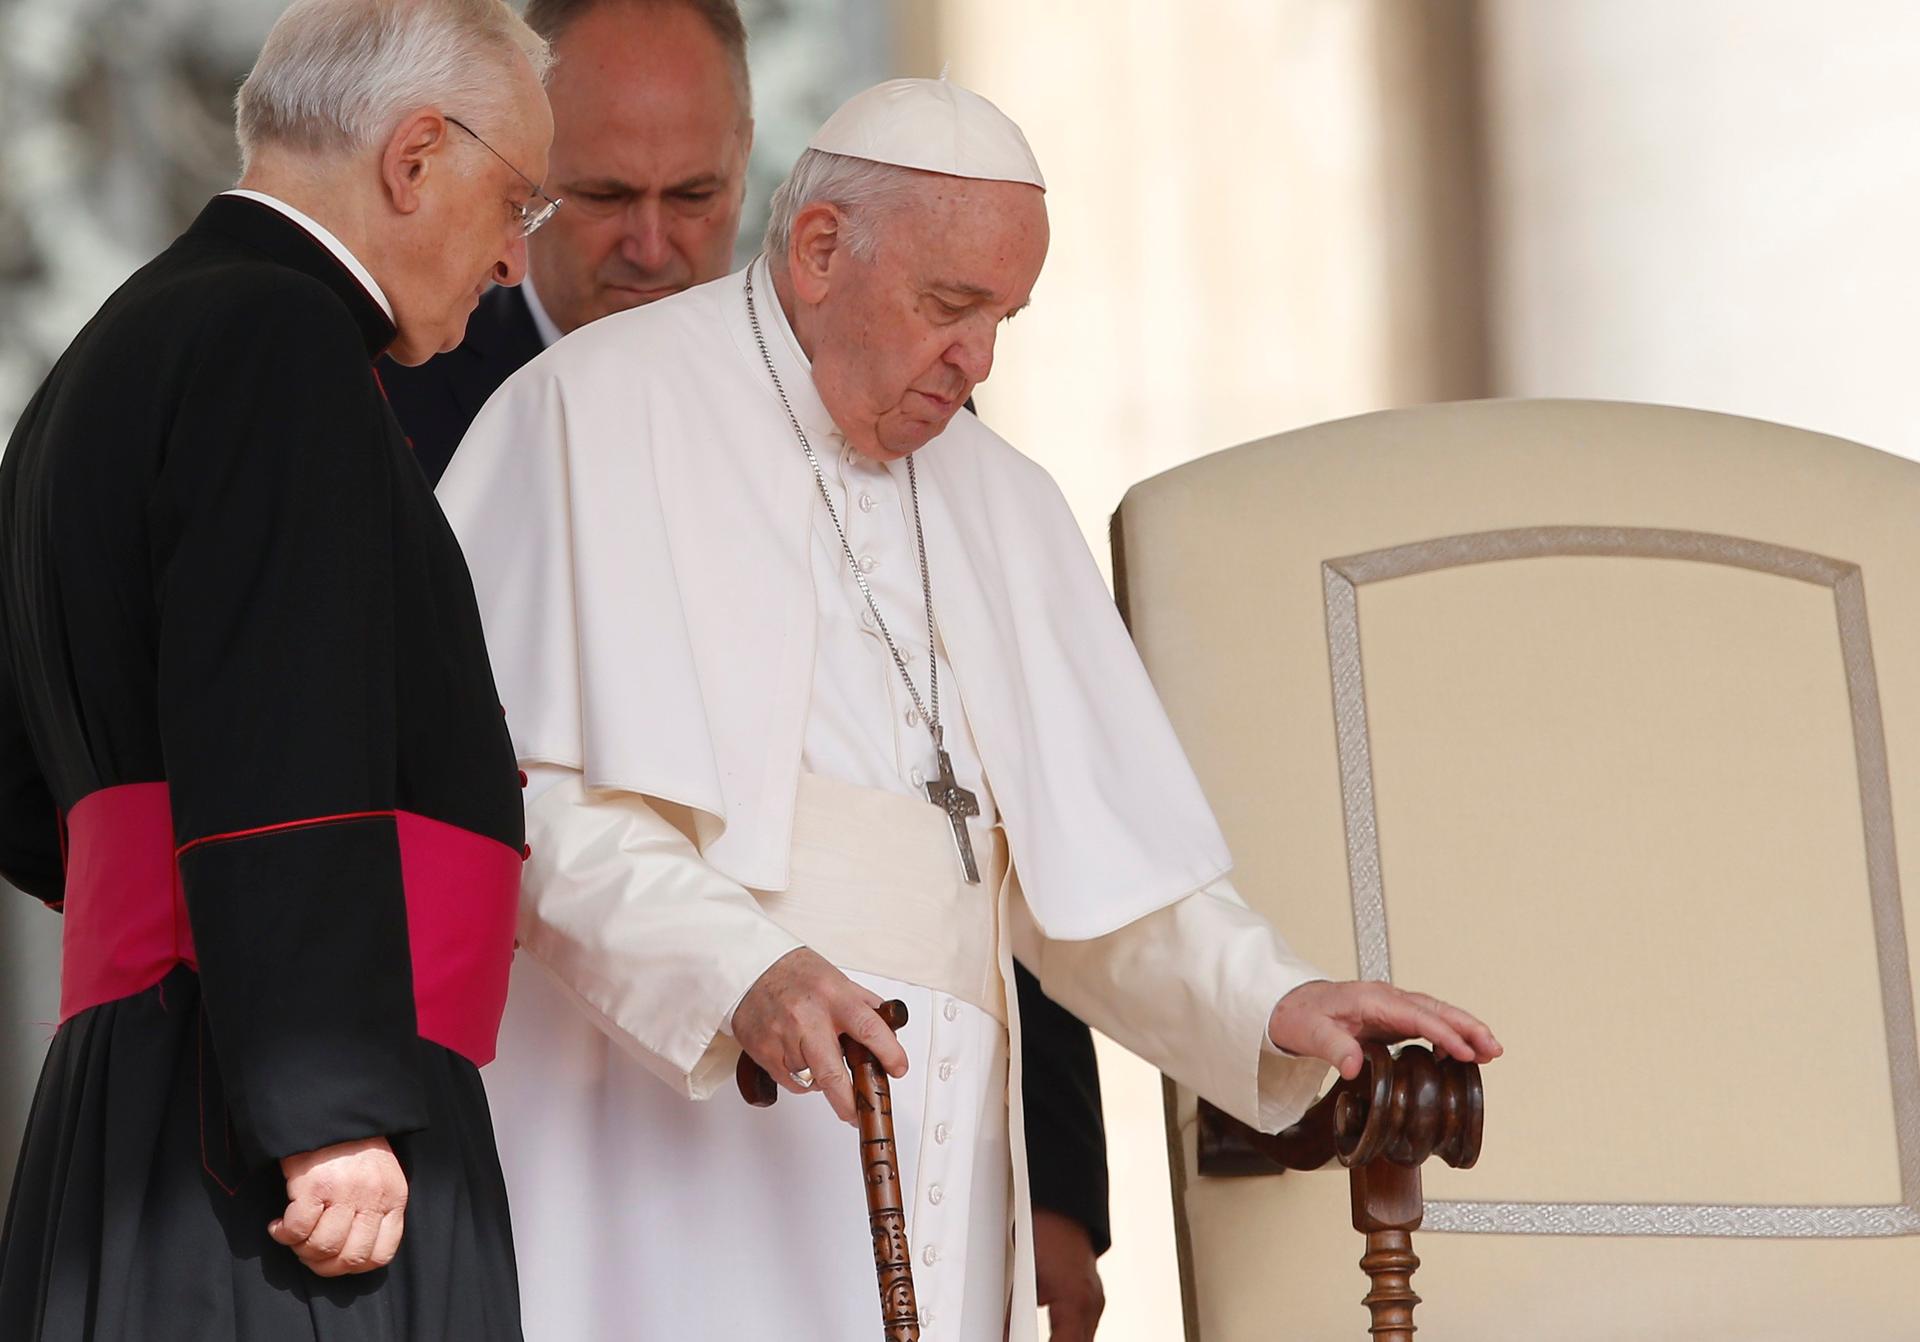 Strength can be found in frailty of old age, pope says